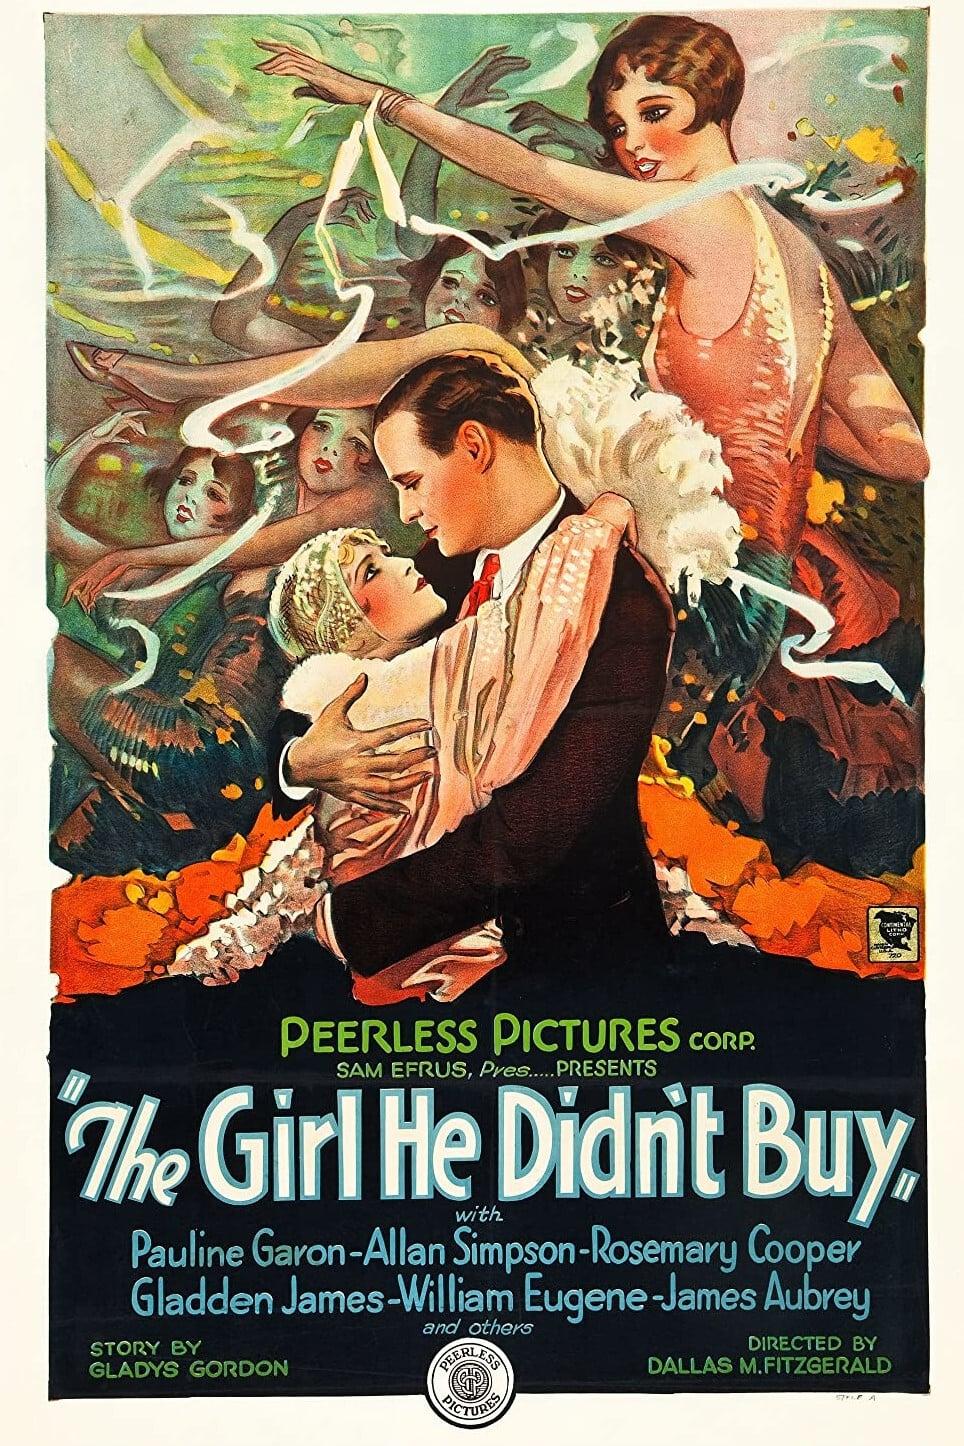 The Girl He Didn't Buy poster